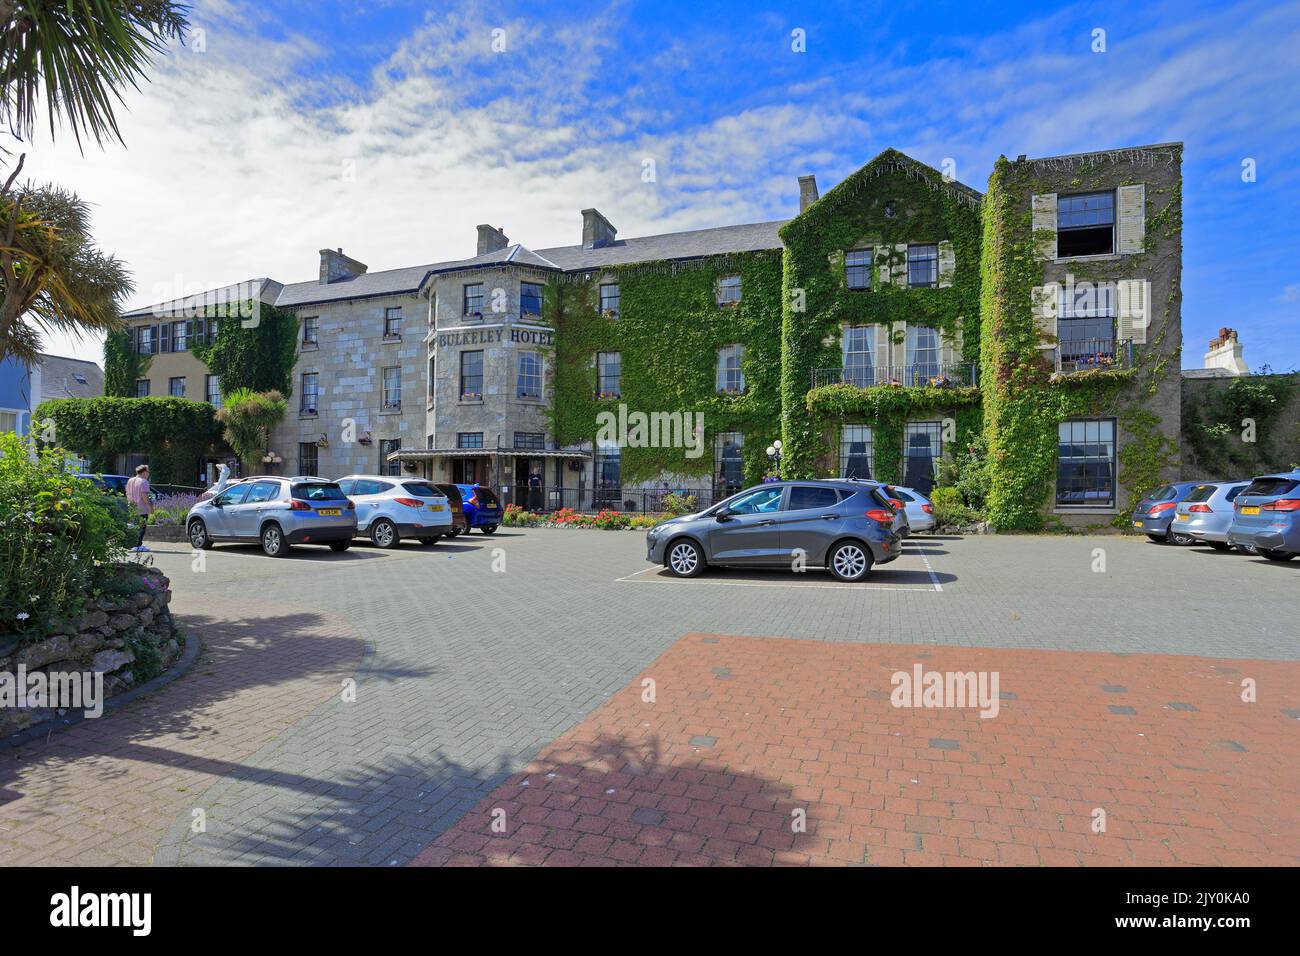 The Bulkeley Hotel, Beaumaris, Isle of Anglesey, Ynys Mon, North Wales, UK. Stock Photo